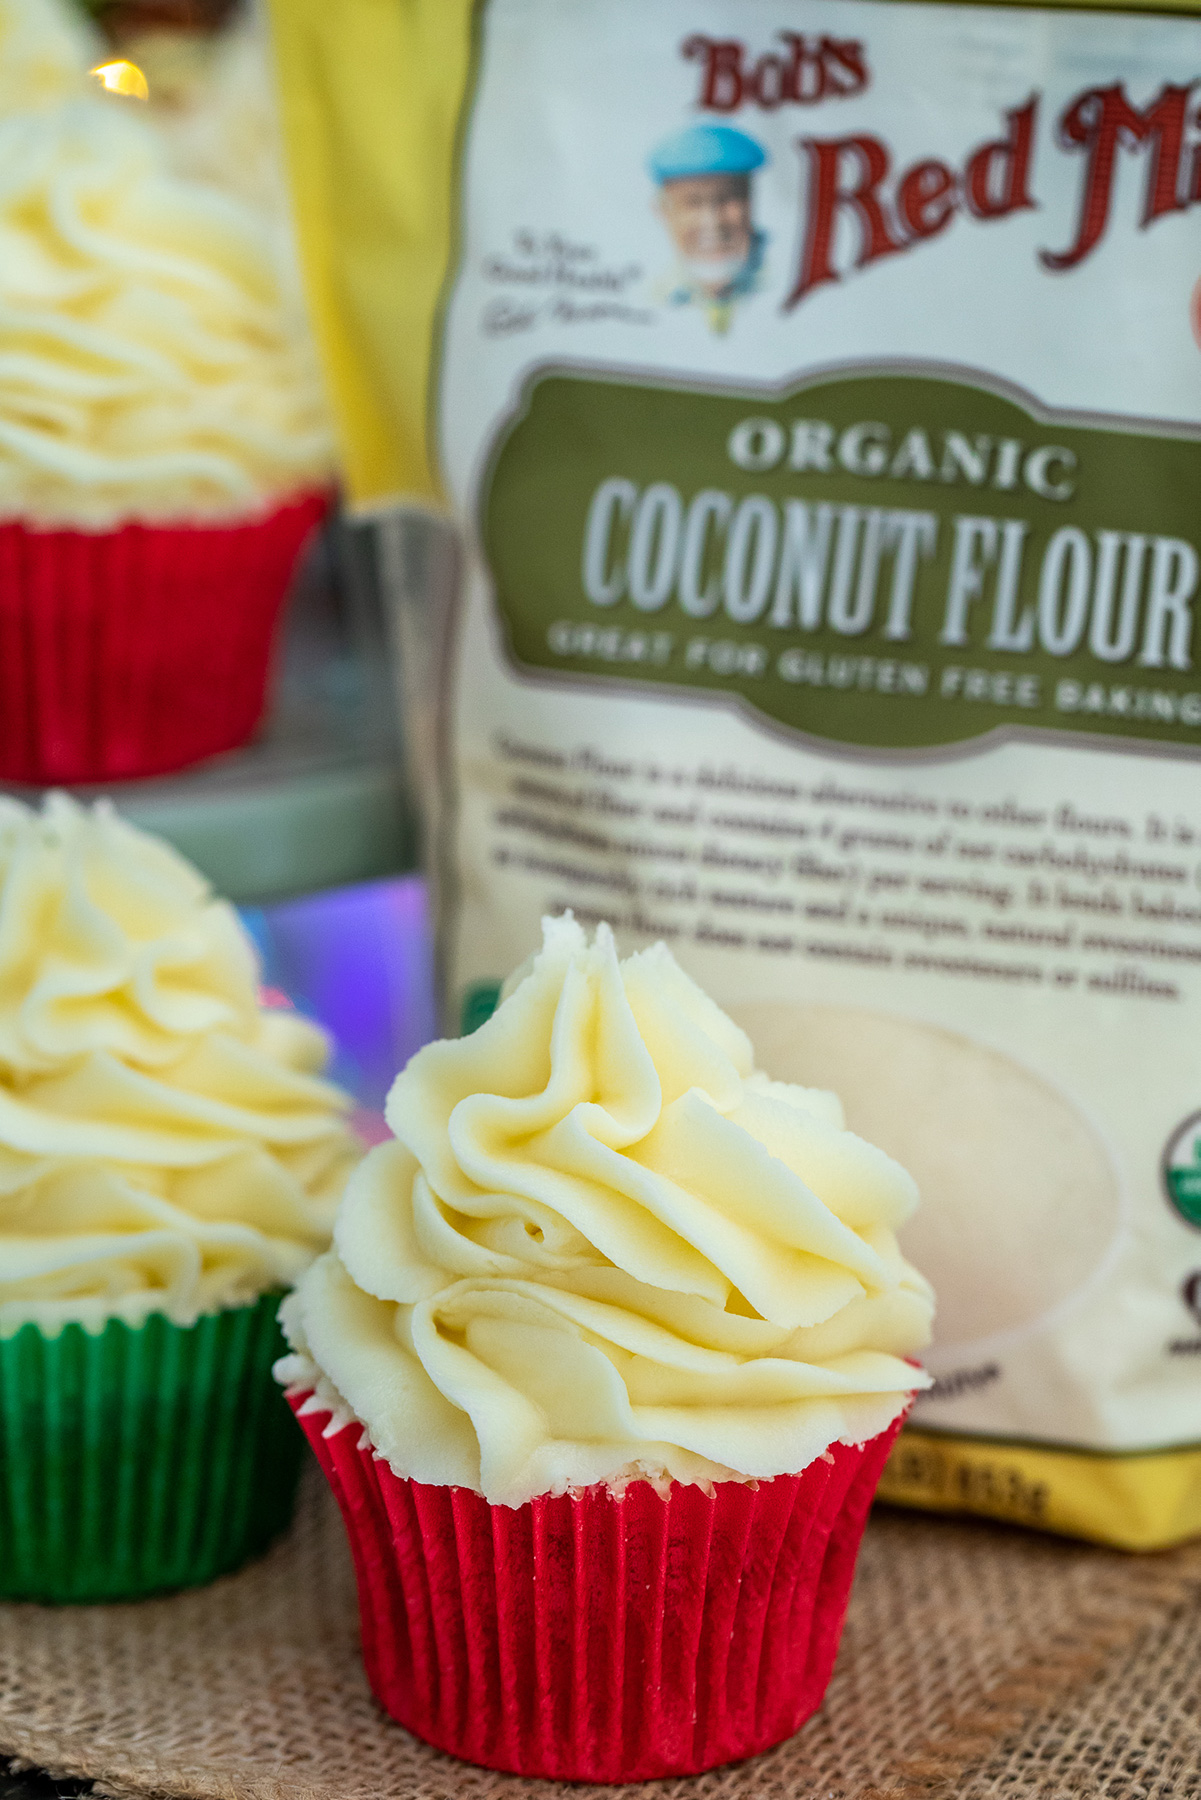 gingerbread cupcake and coconut flour bag 